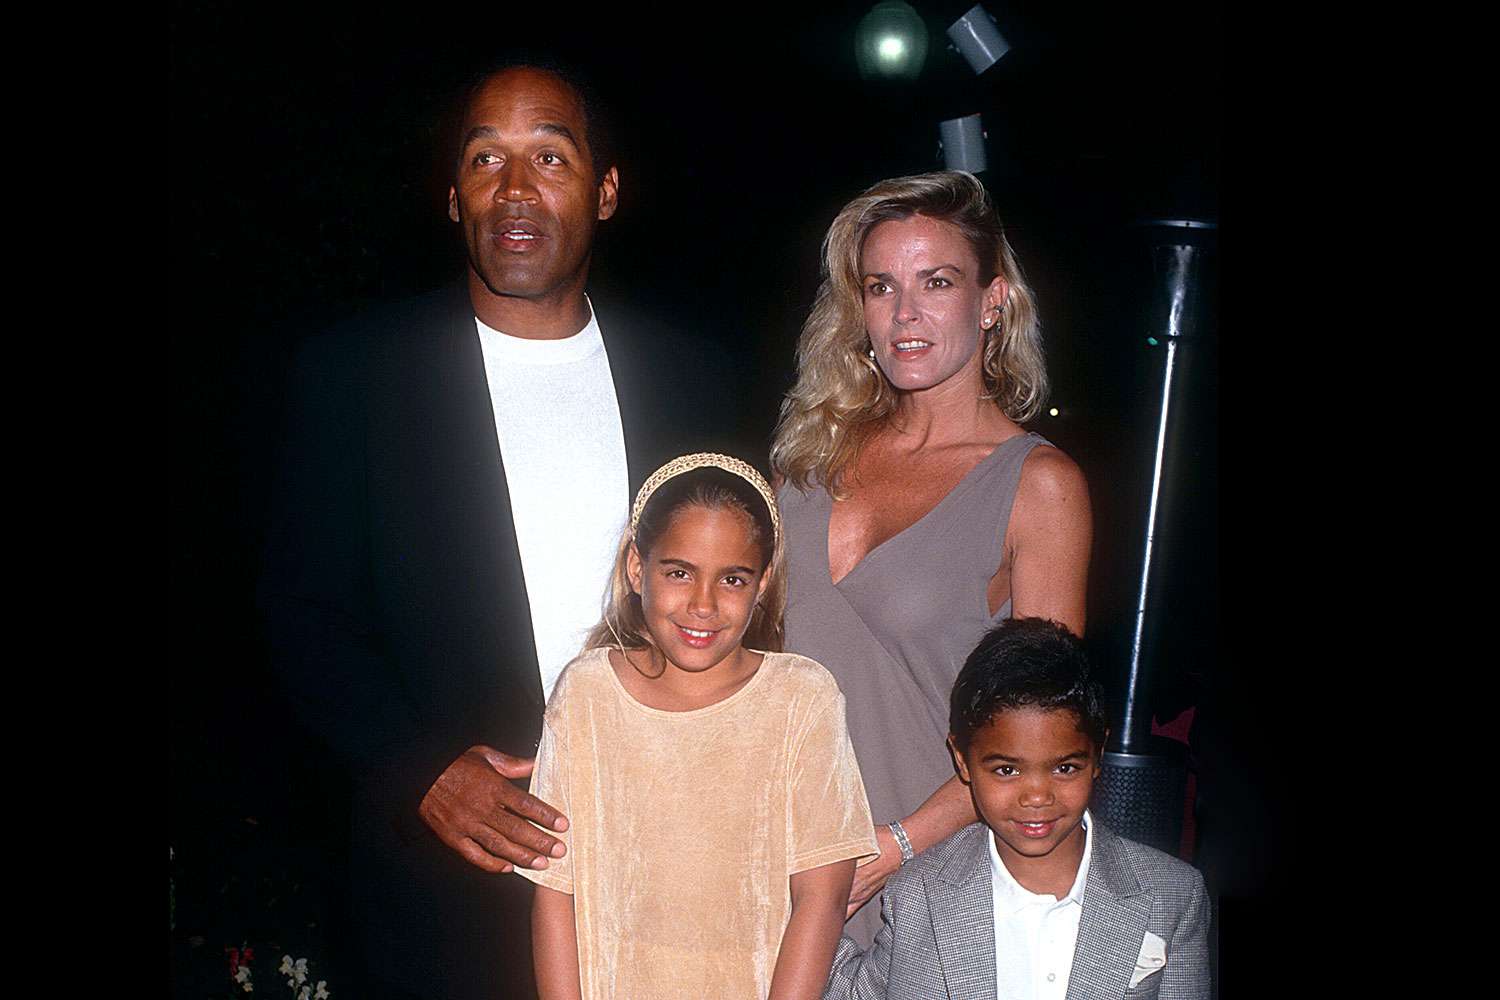 Nicole Brown Simpson’s Happy Life: Meet the Fun-Loving Mom Who Adored Dancing, Horses and Made Holidays Special (Exclusive)